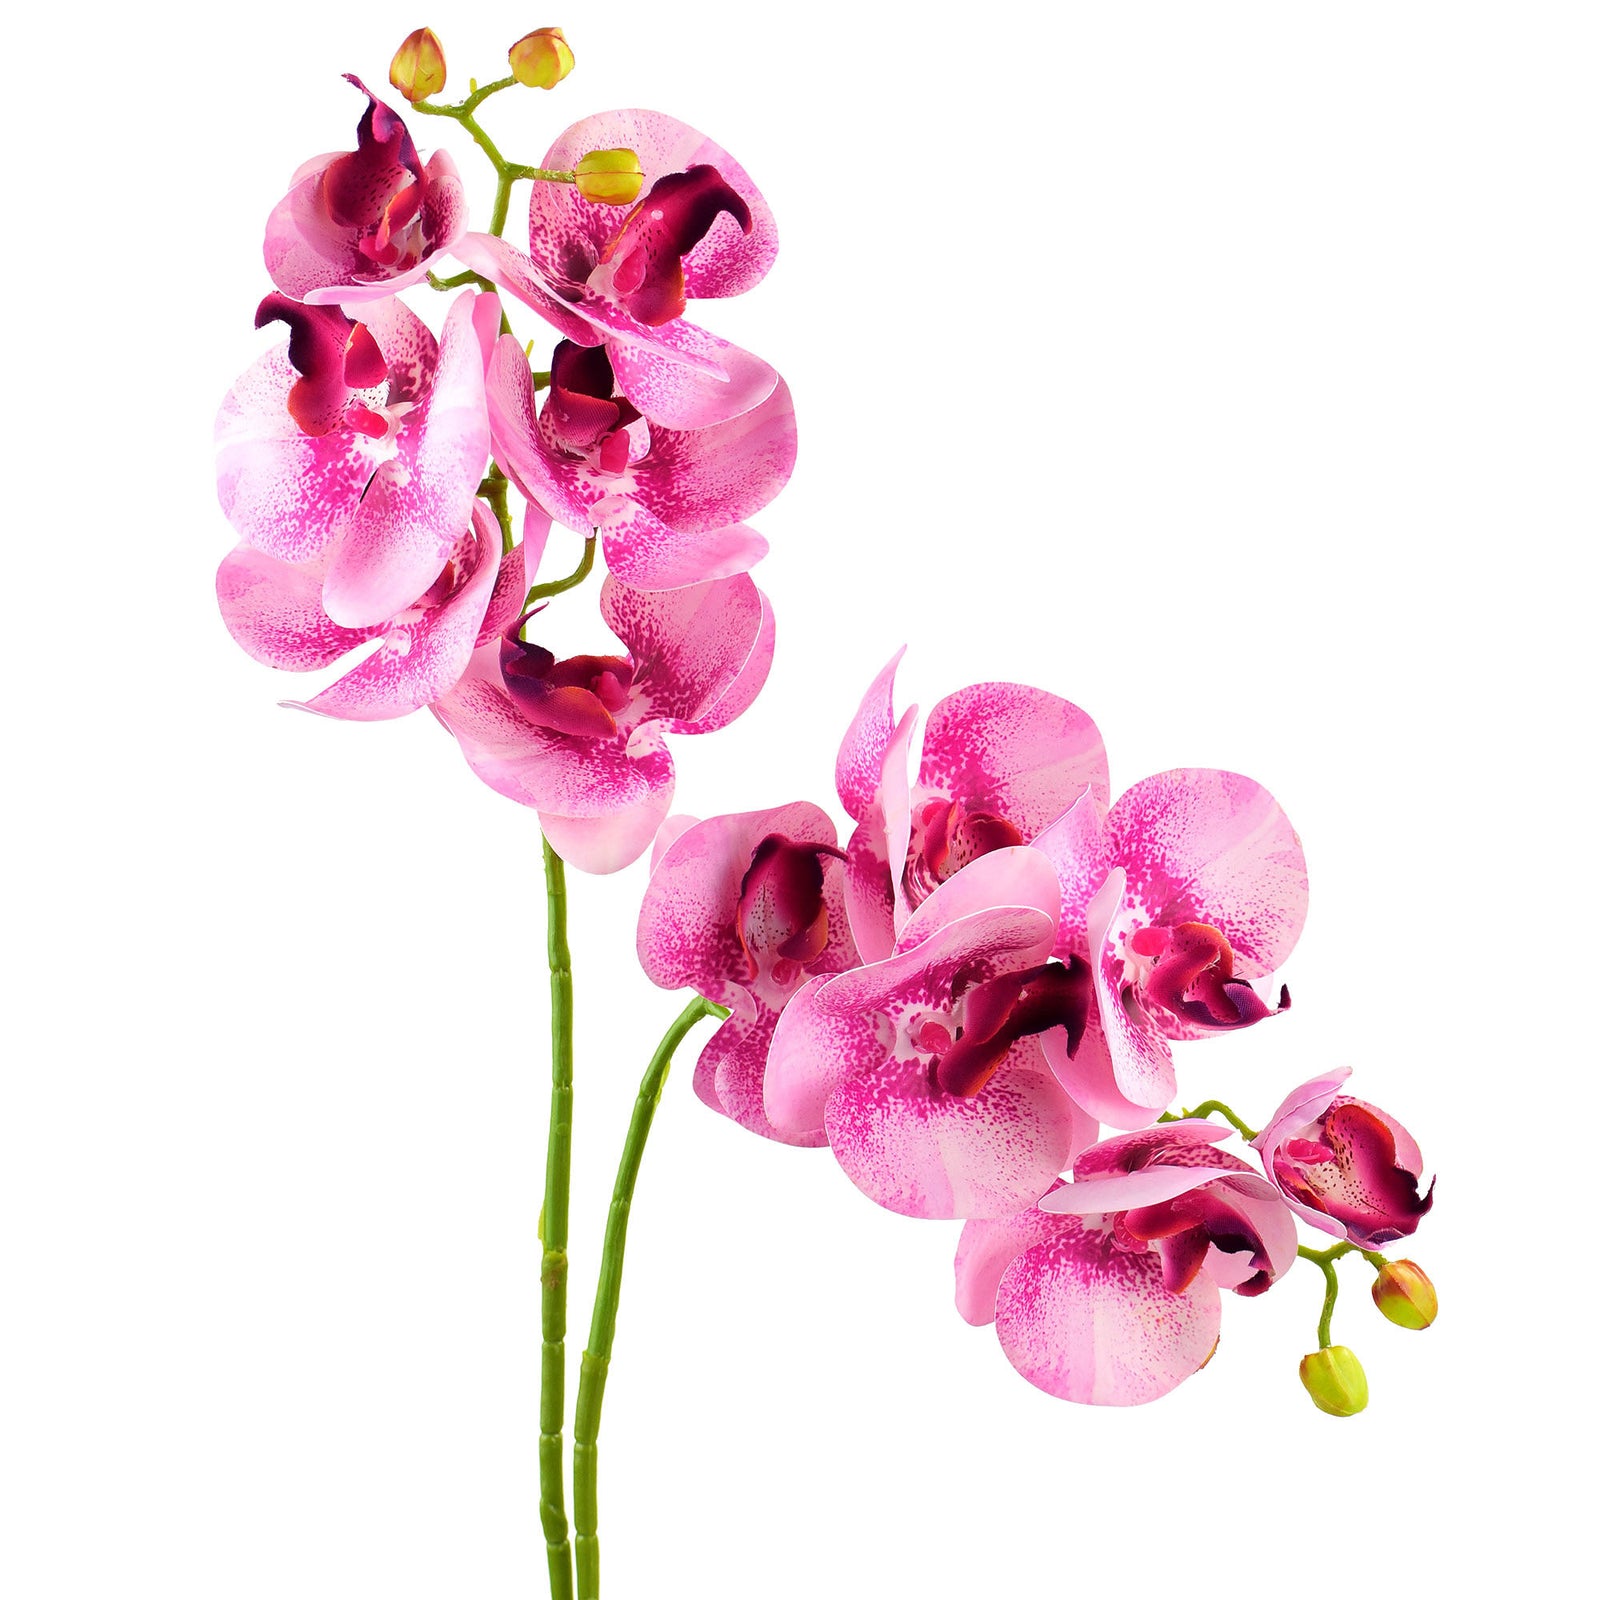 Pastel Violet 2 Stems Real Touch Artificial Butterfly Orchids/Moth Orchid/Phalaenopsis Flowers 27.6" Tall 70cm